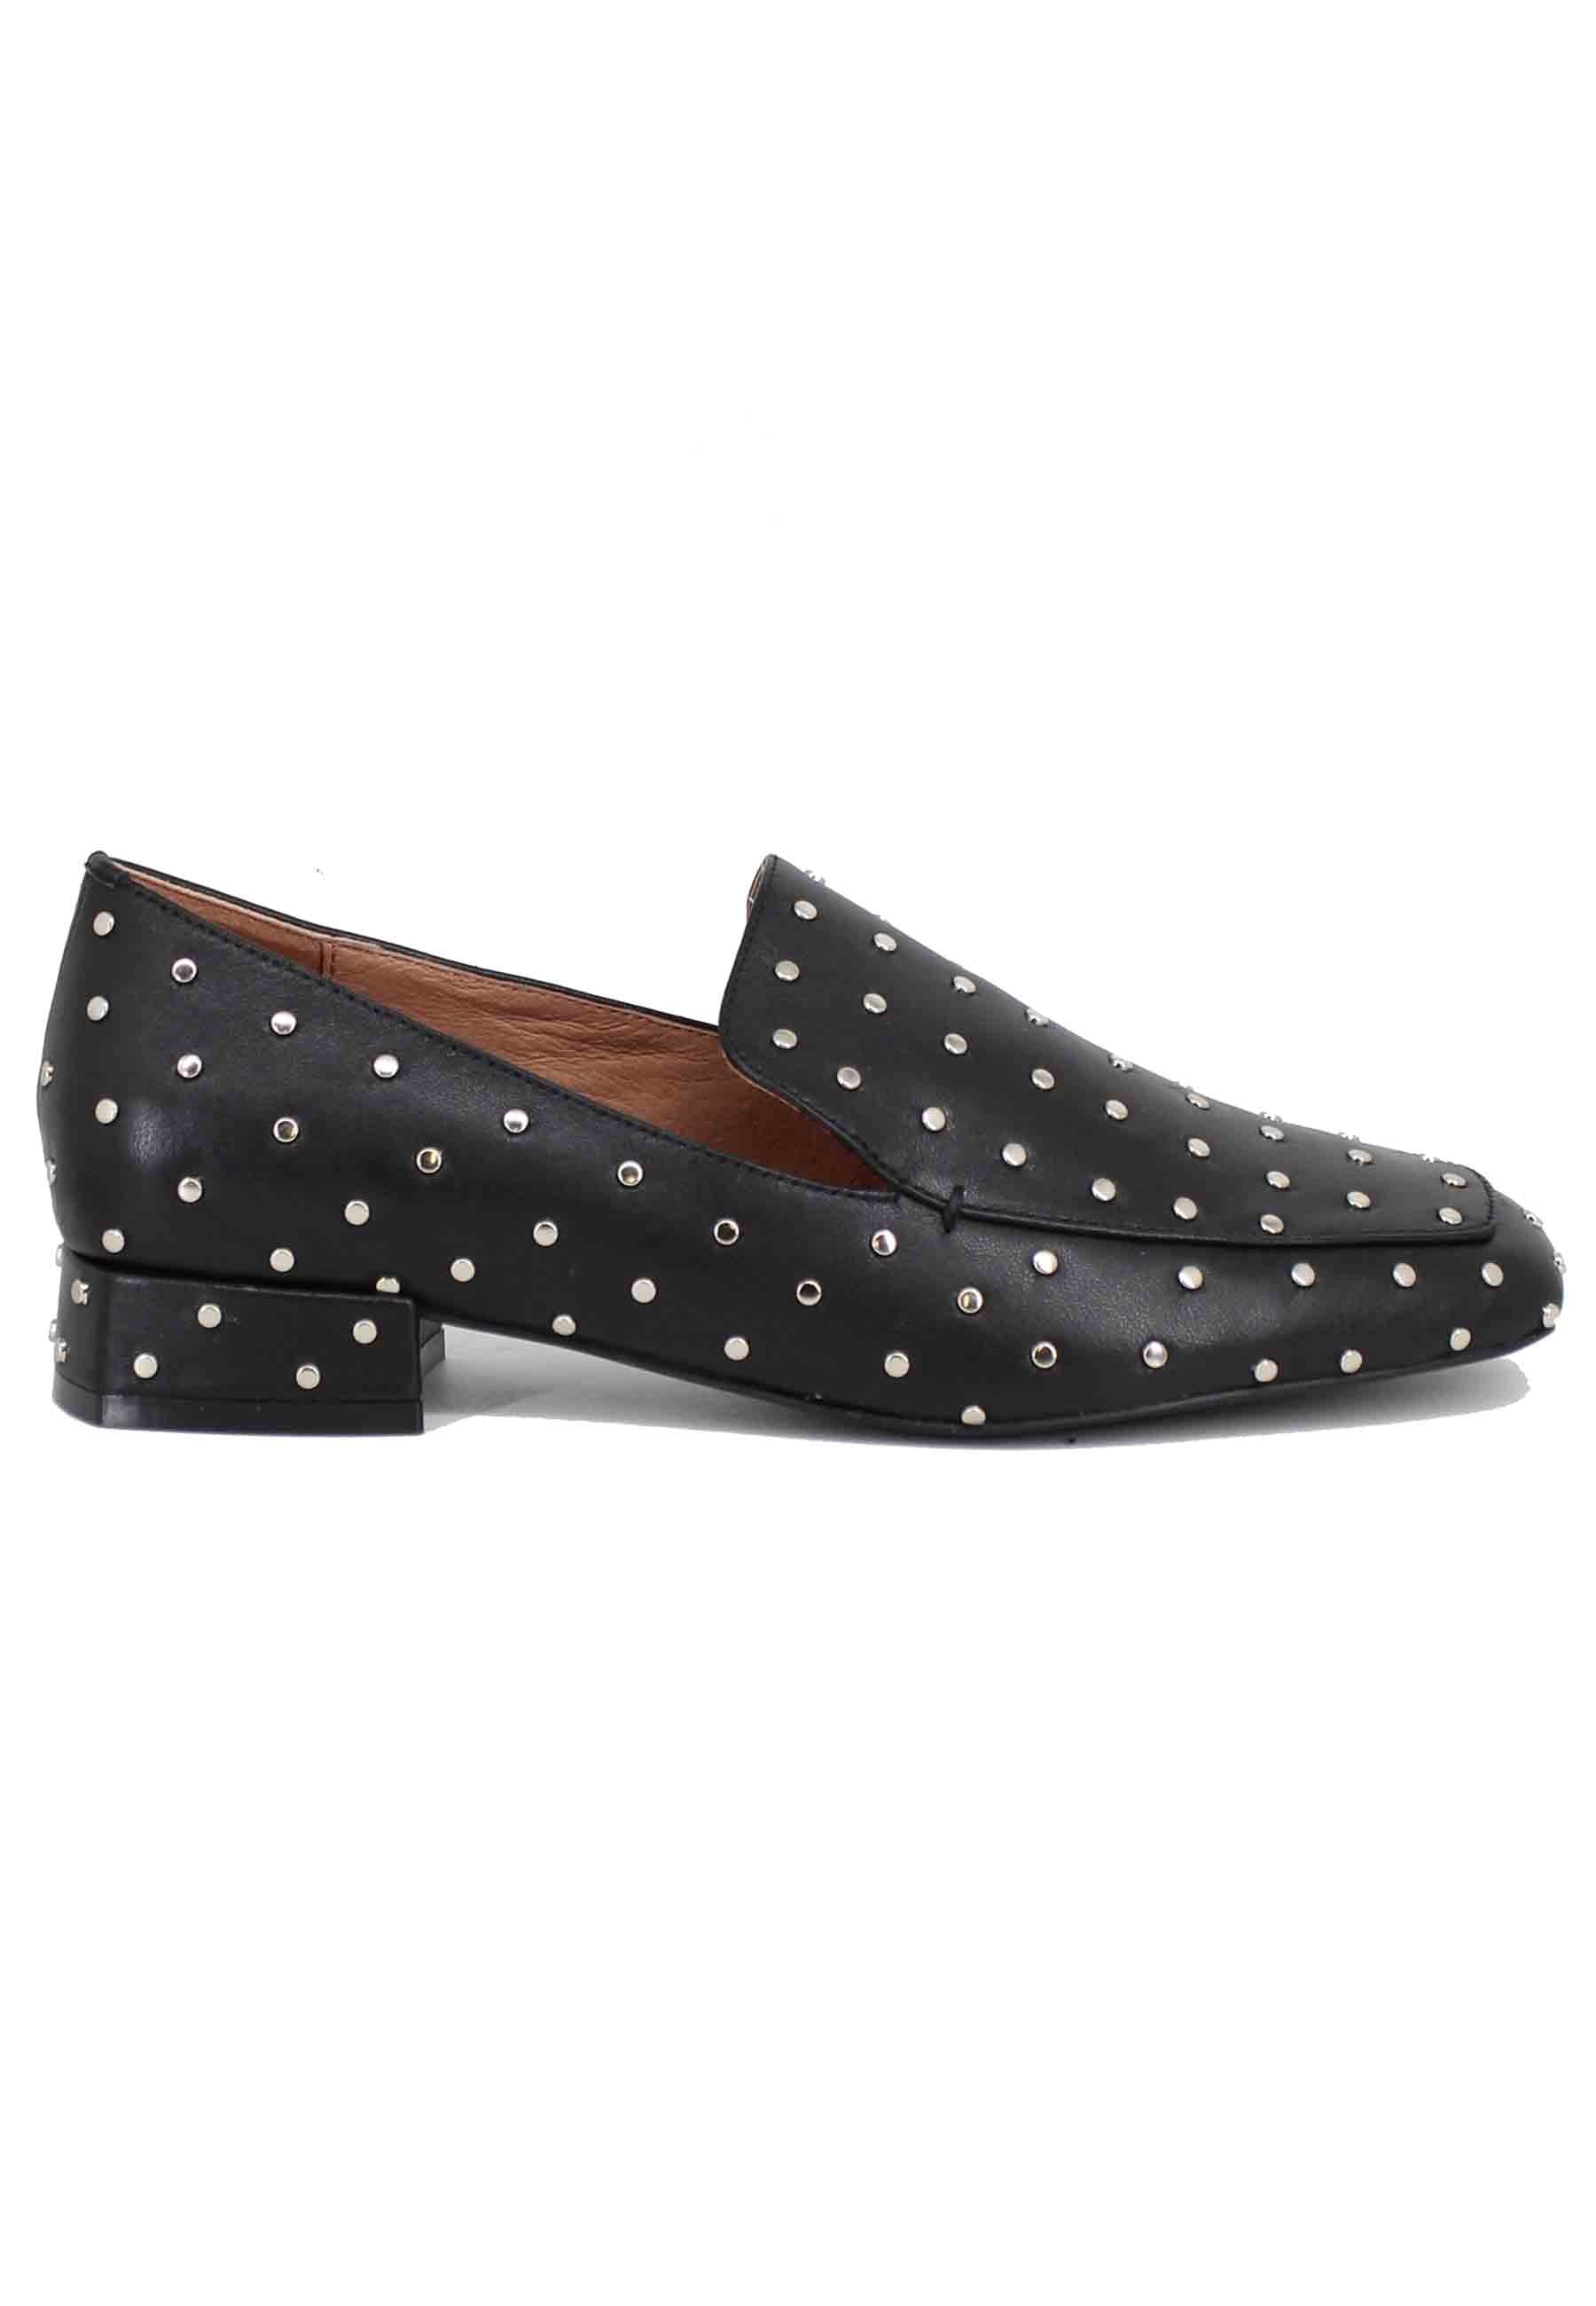 Women's black leather loafers with silver studs Lillian